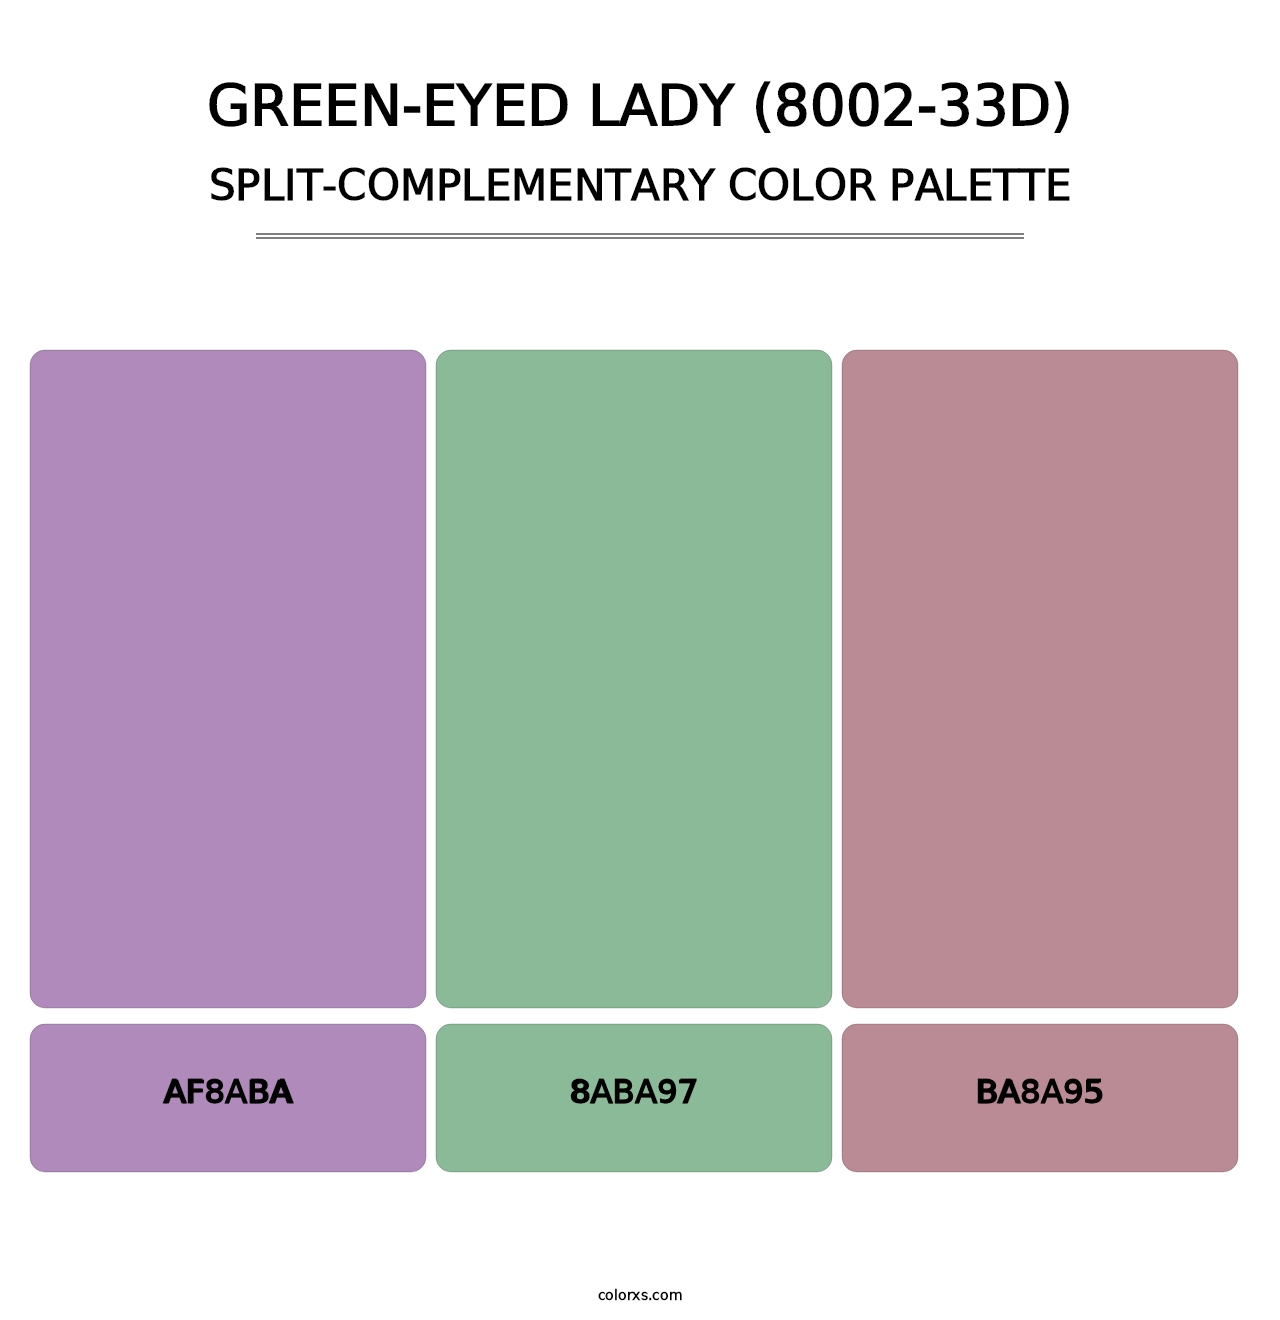 Green-Eyed Lady (8002-33D) - Split-Complementary Color Palette